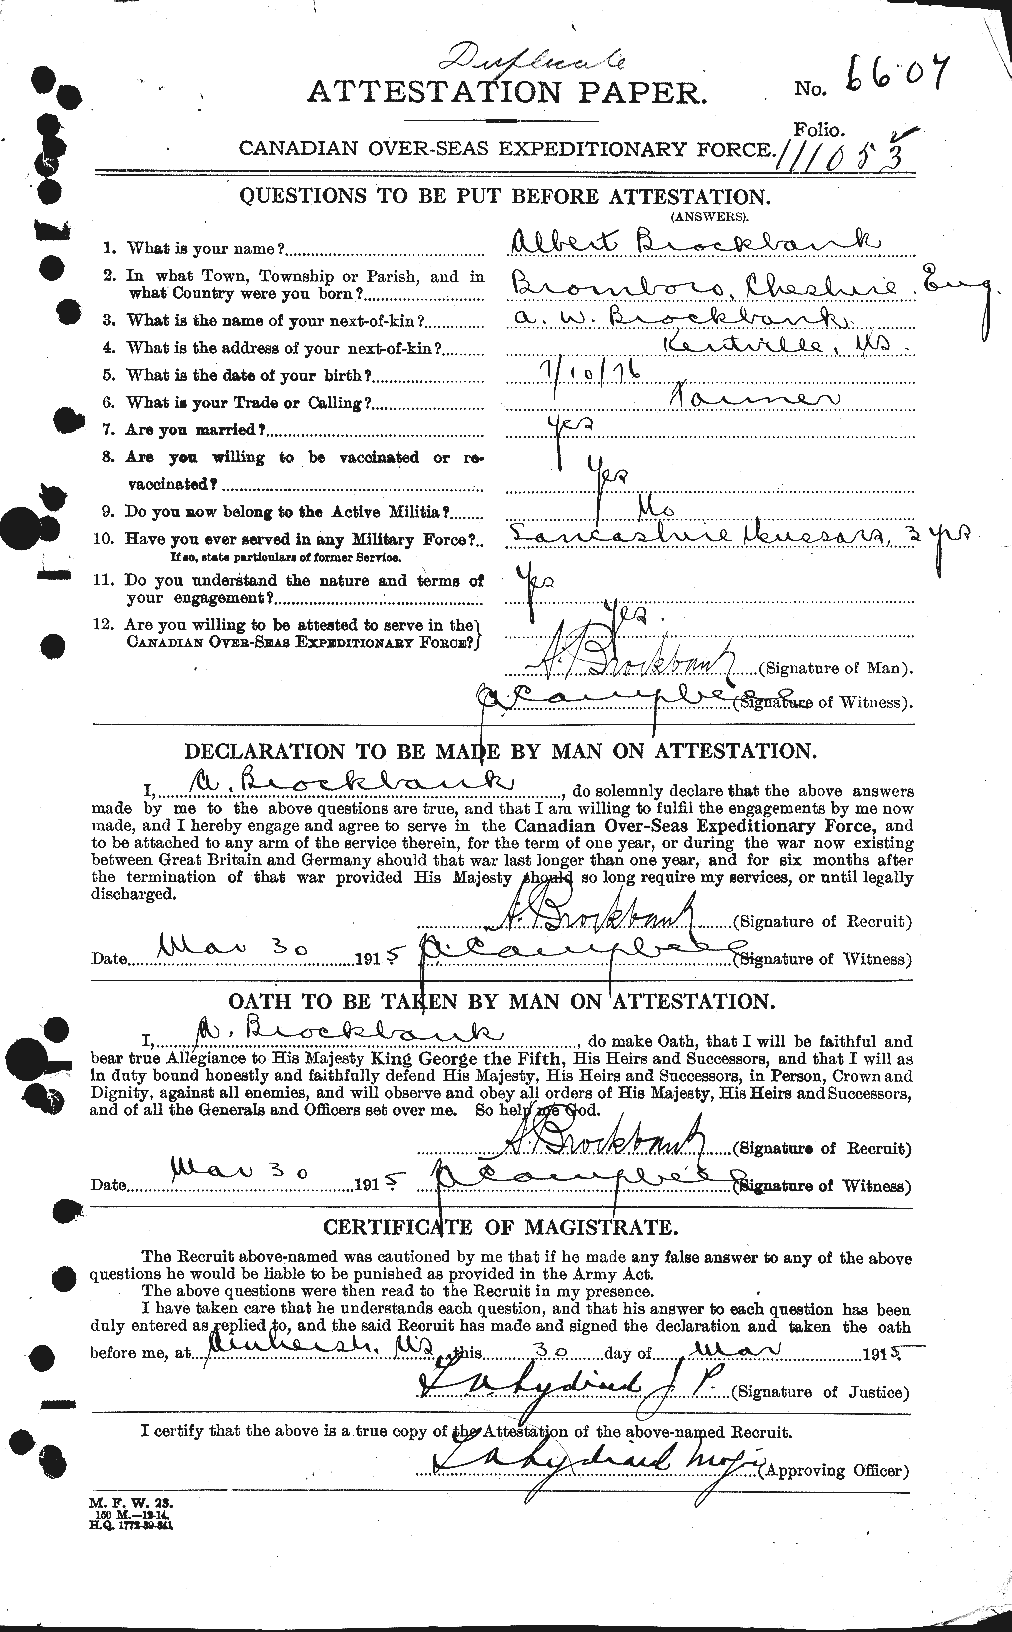 Personnel Records of the First World War - CEF 258255a